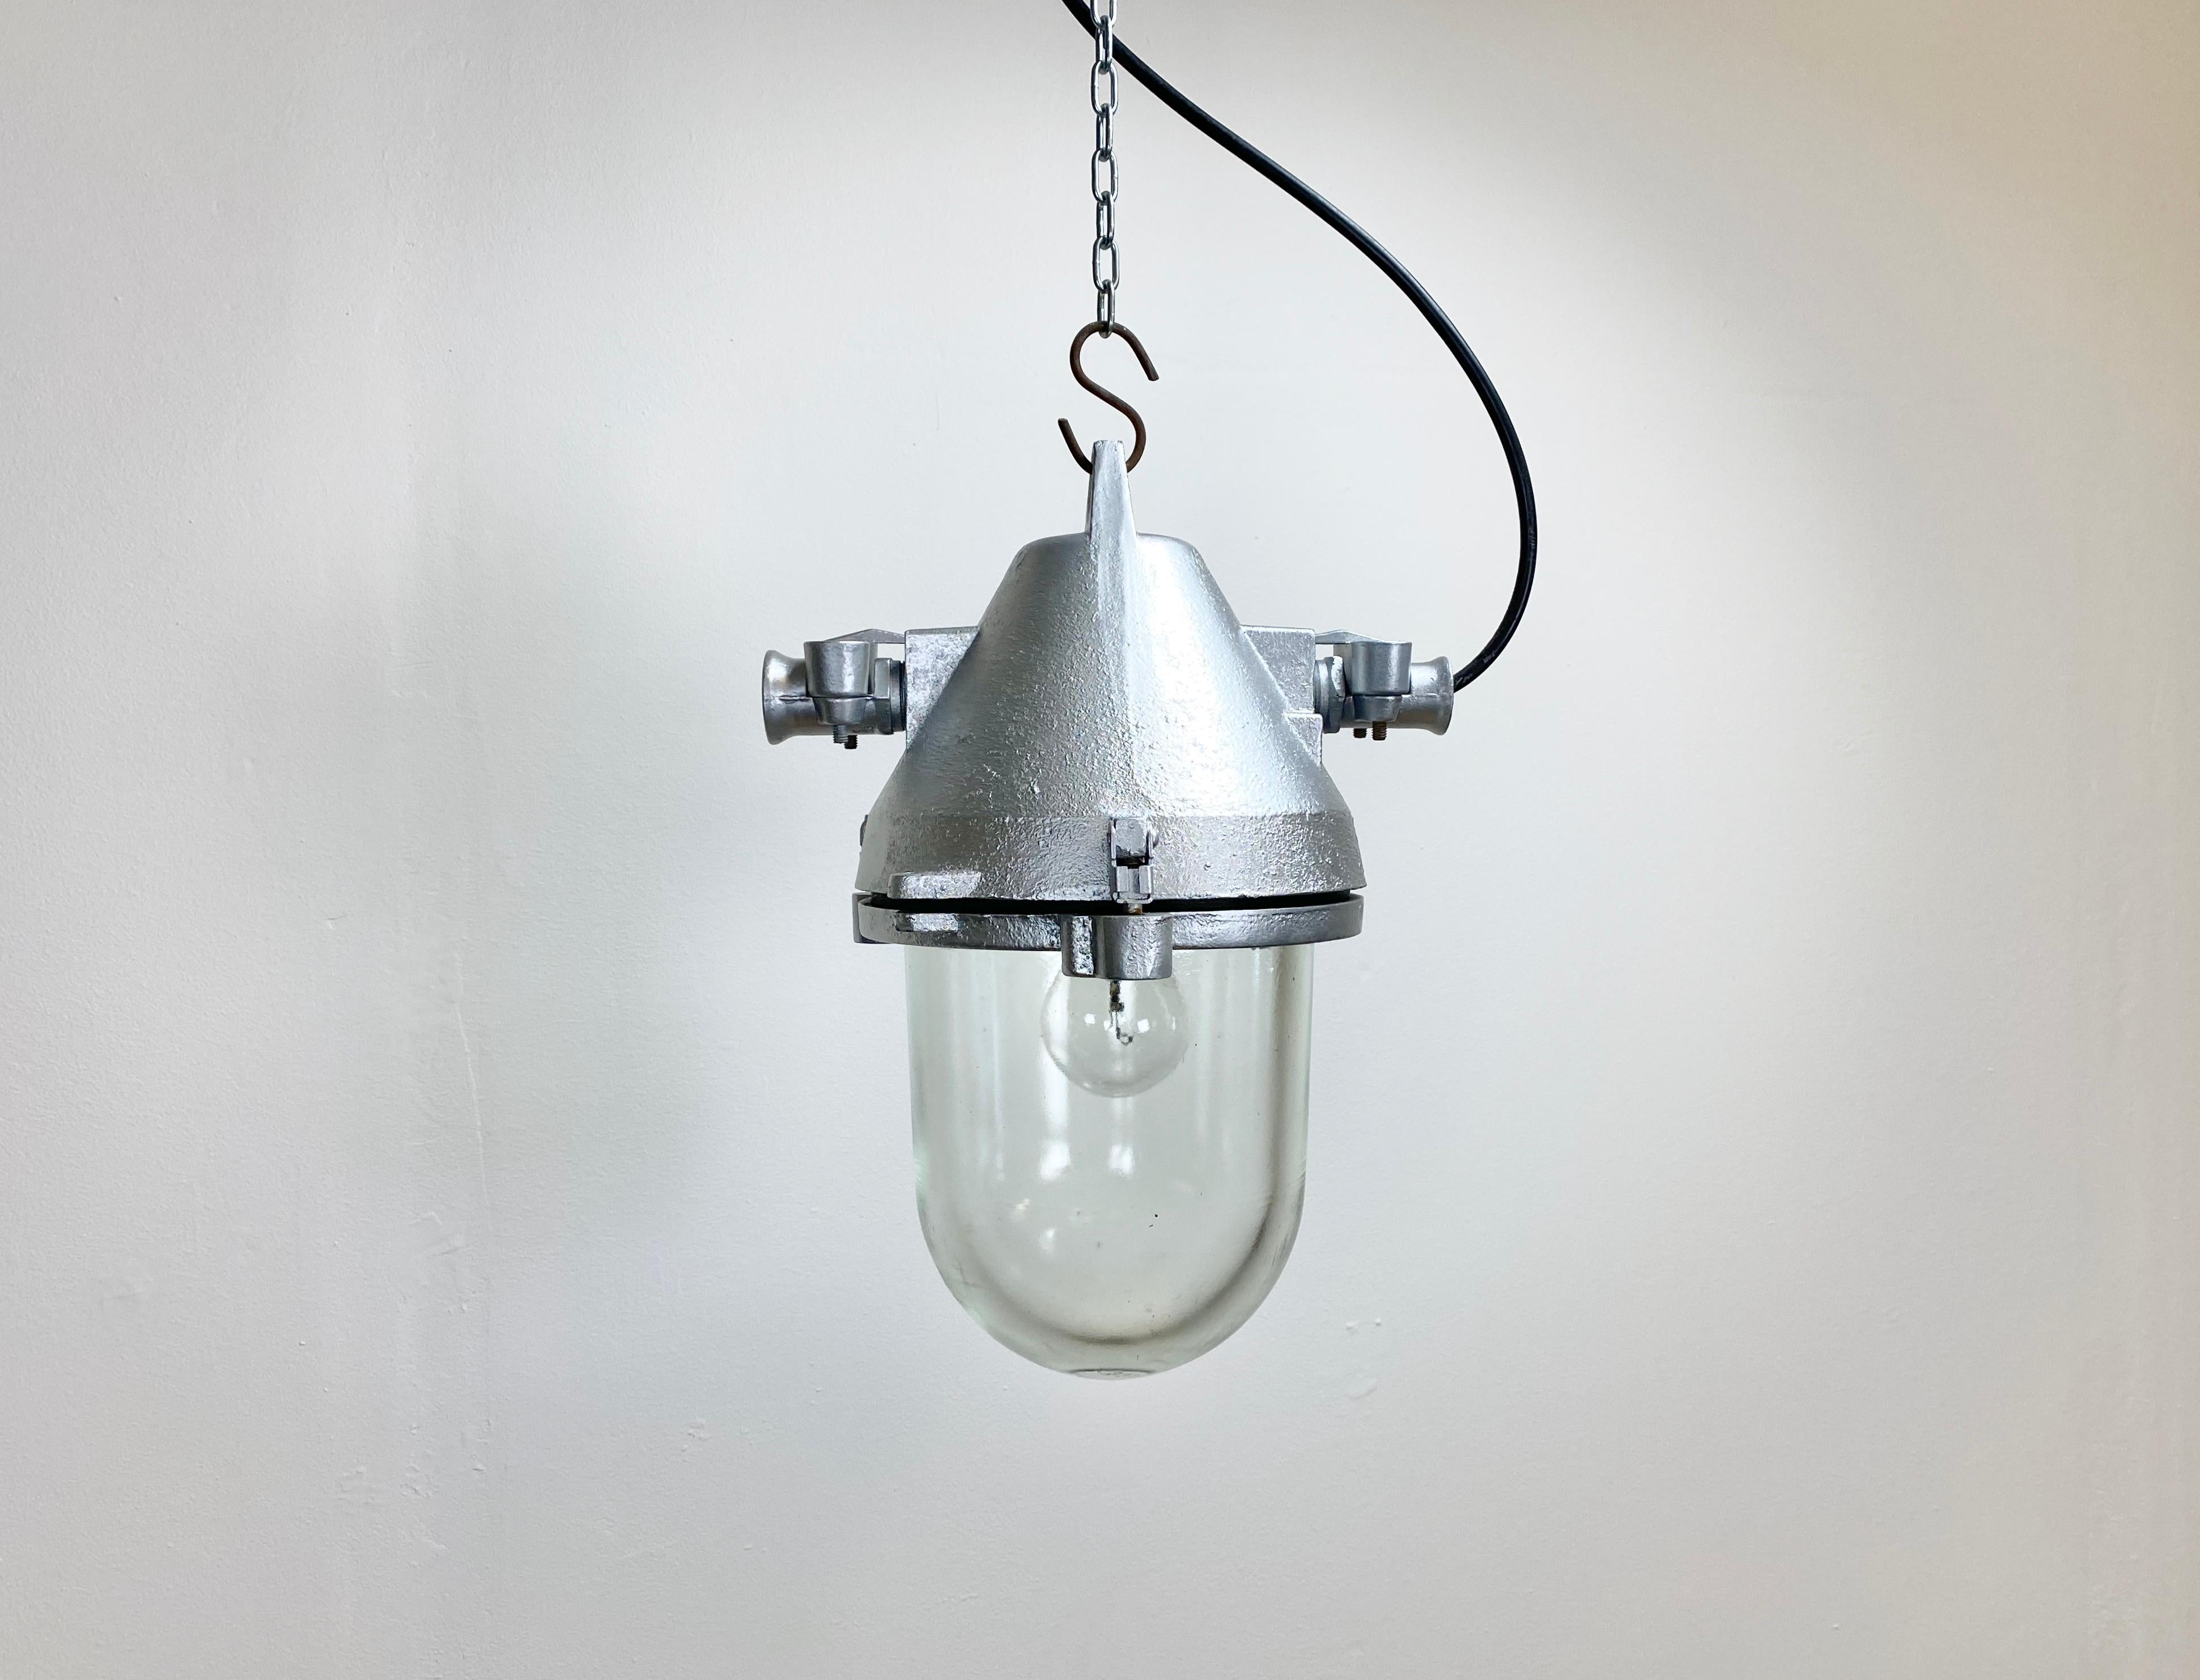 Silver industrial lamp with massive protective glass bulb. Made by Elektrosvit in former Czechoslovakia during the 1960s.It features silver cast aluminium body and clear glass. Porcelain socket for E27 lightbulbs. Newly wired. Weight: 5.5 kg.